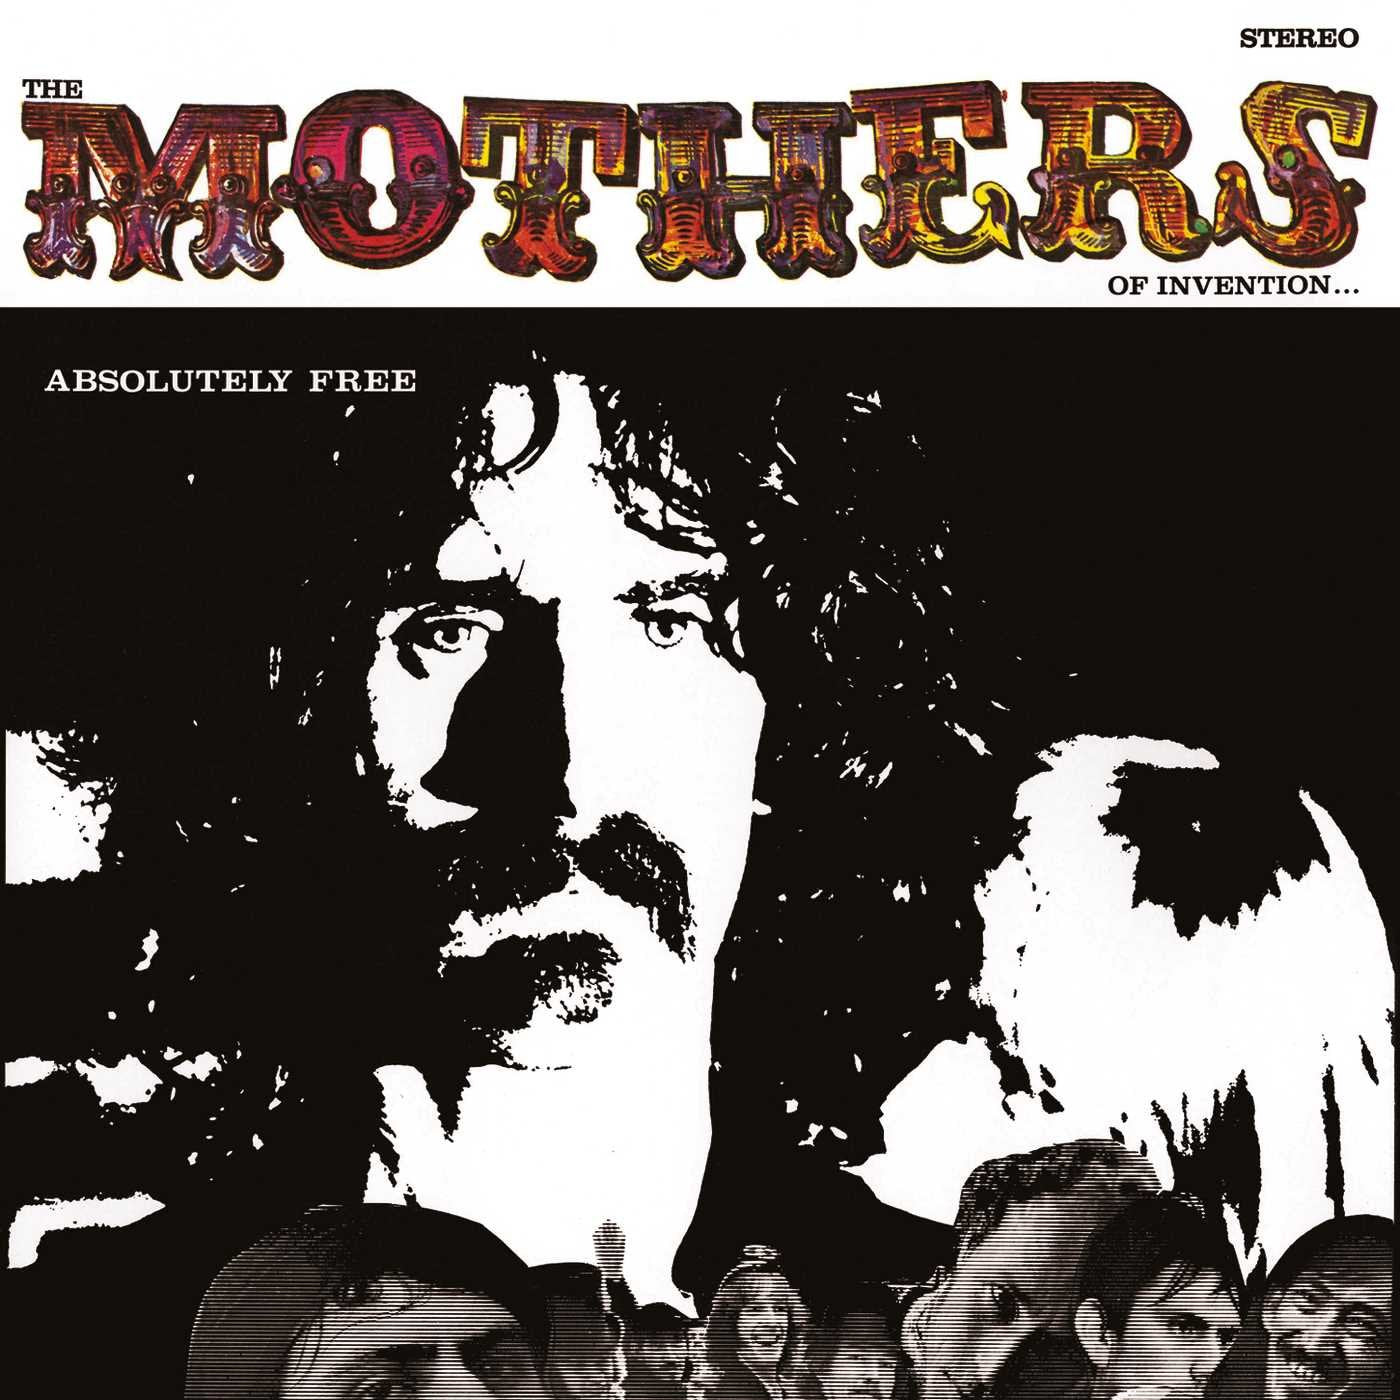 Frank Zappa & The Mothers Of Invention -Absolutely Free CD